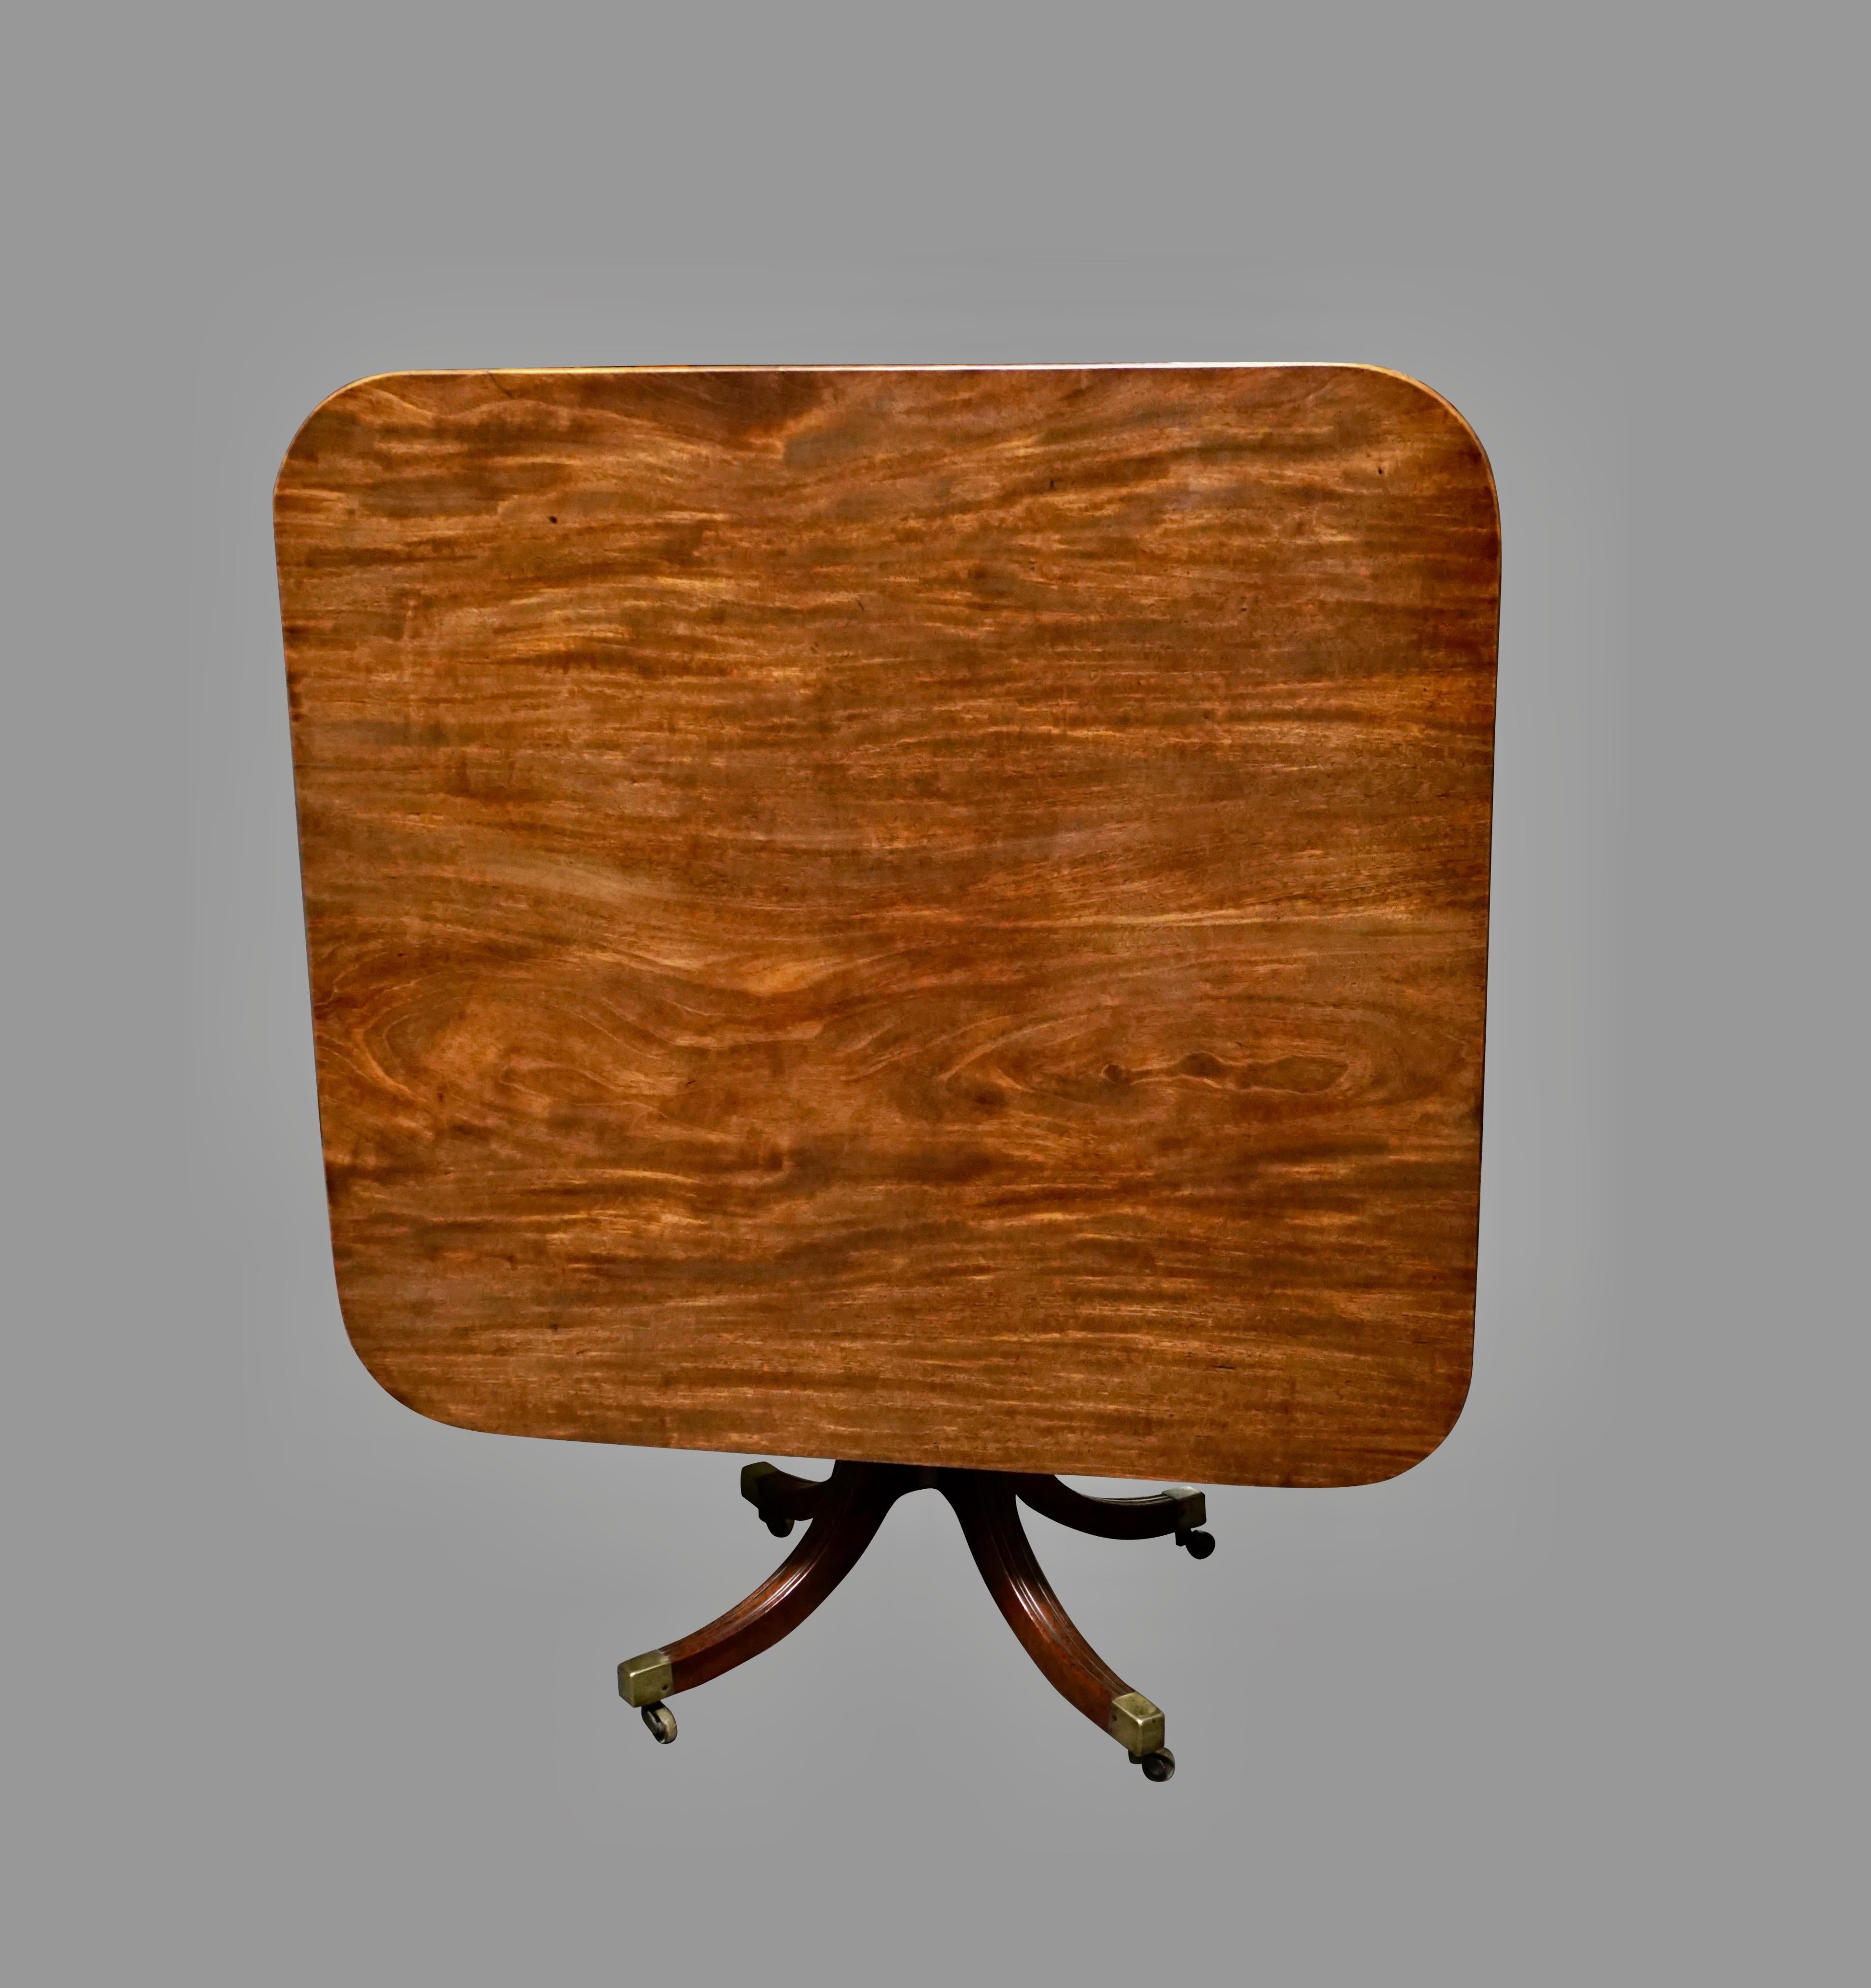 An English figured mahogany breakfast table, the almost square tilt-top with a reeded edge, supported on a reeded downswept quadripartite base ending in brass casters, circa 1815.